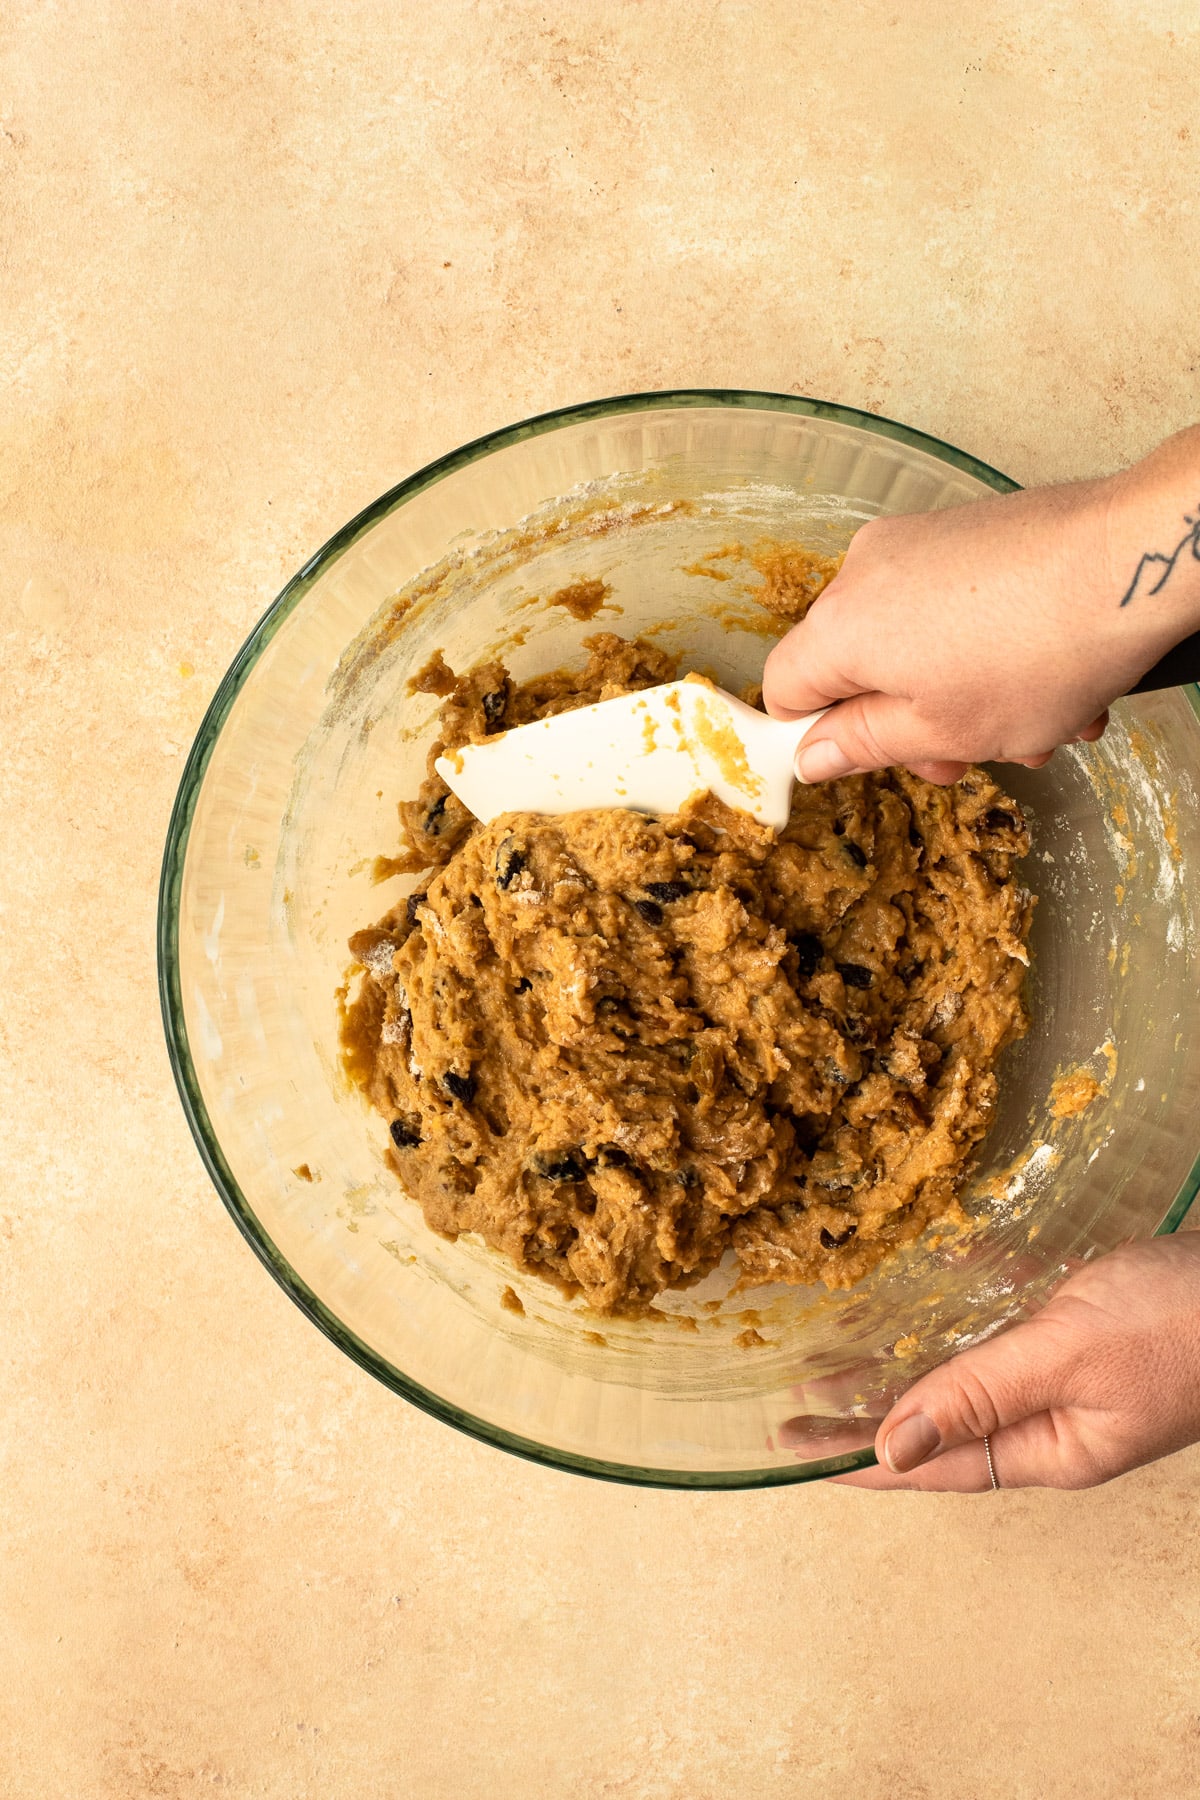 Raisin cinnamon roll dough being mixed with a spatula in a glass bowl.